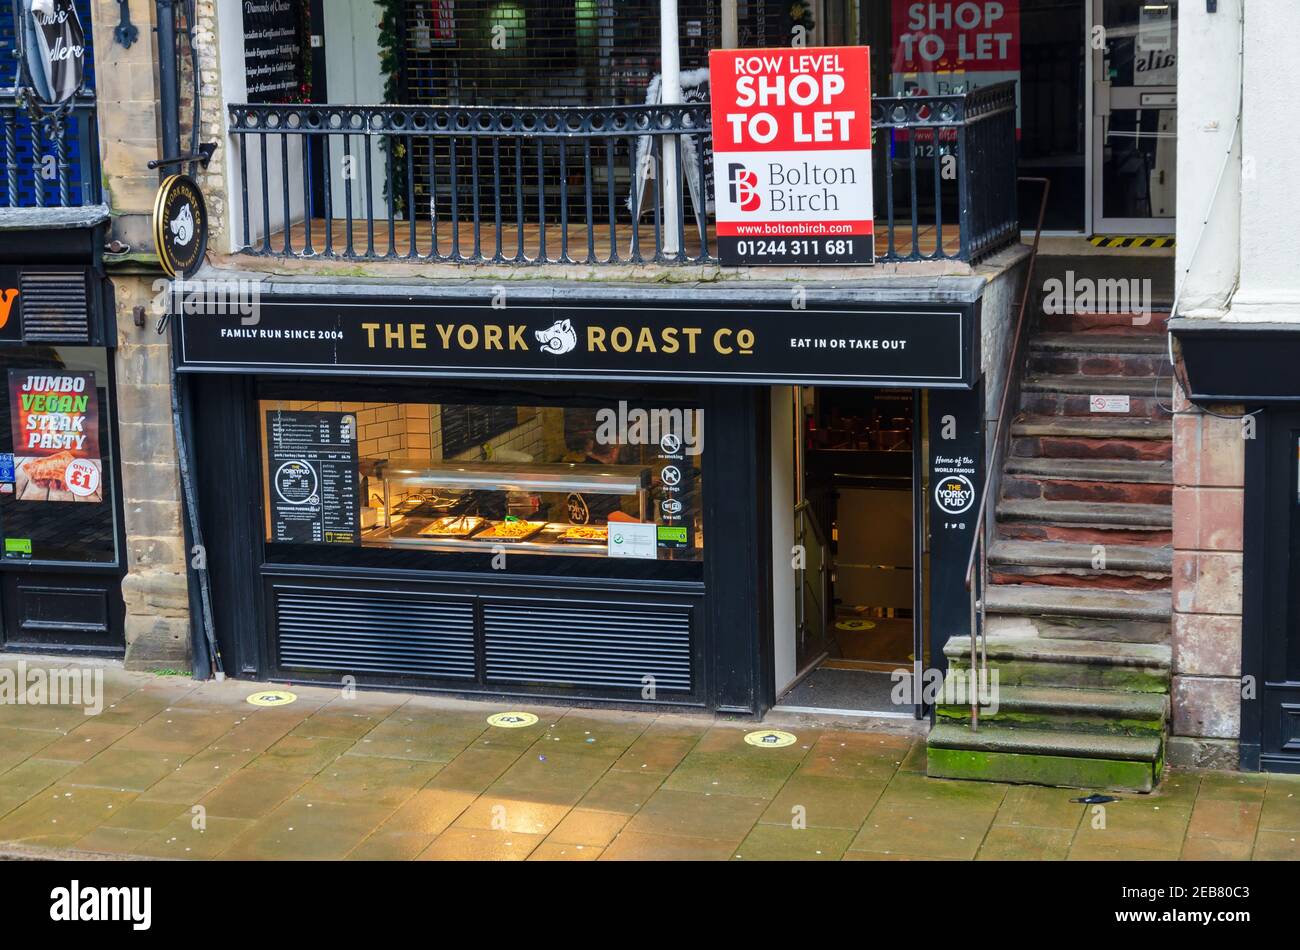 Chester; UK: Jan 29, 2021: The York Roast Co is a sandwich shop which specialises in roast meats chocolate retailer. The Chester cafe is open for take Stock Photo